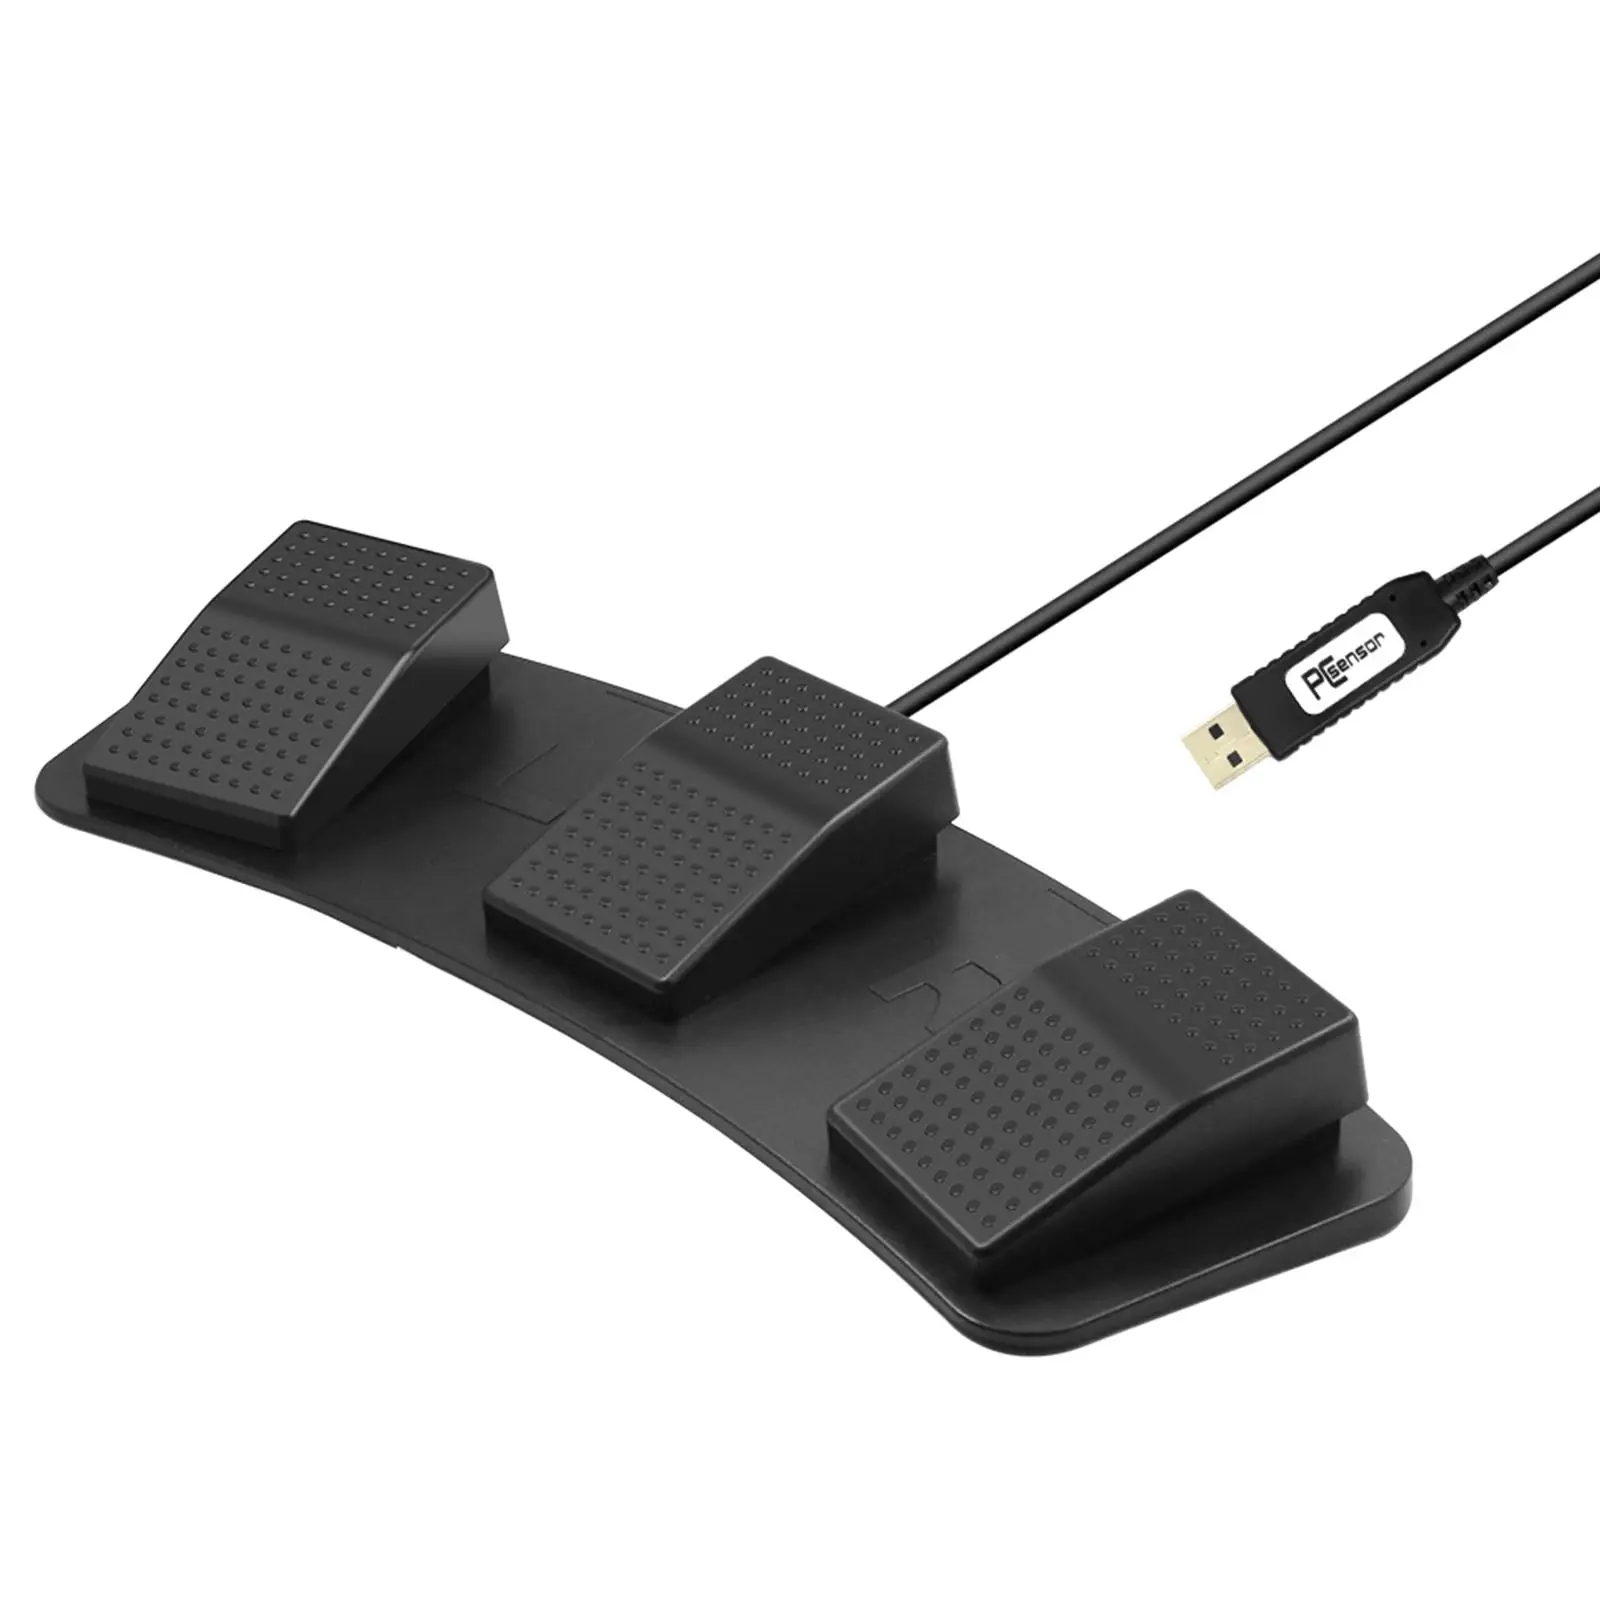 Upgraded USB Foot Pedal Control Switch Three Button PC Game Foot Pedal for PC Laptop Keyboard Gaming Equipment Mouse Video Game